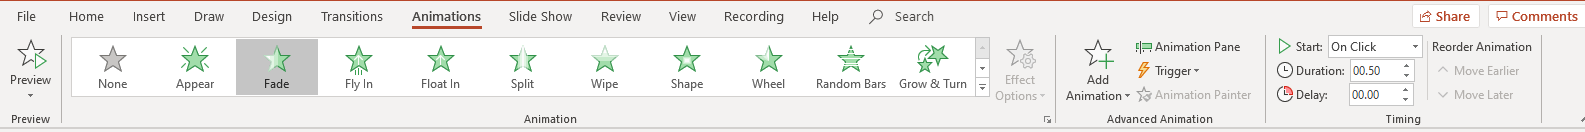 Animations tab in the Ribbon in PowrePoint.